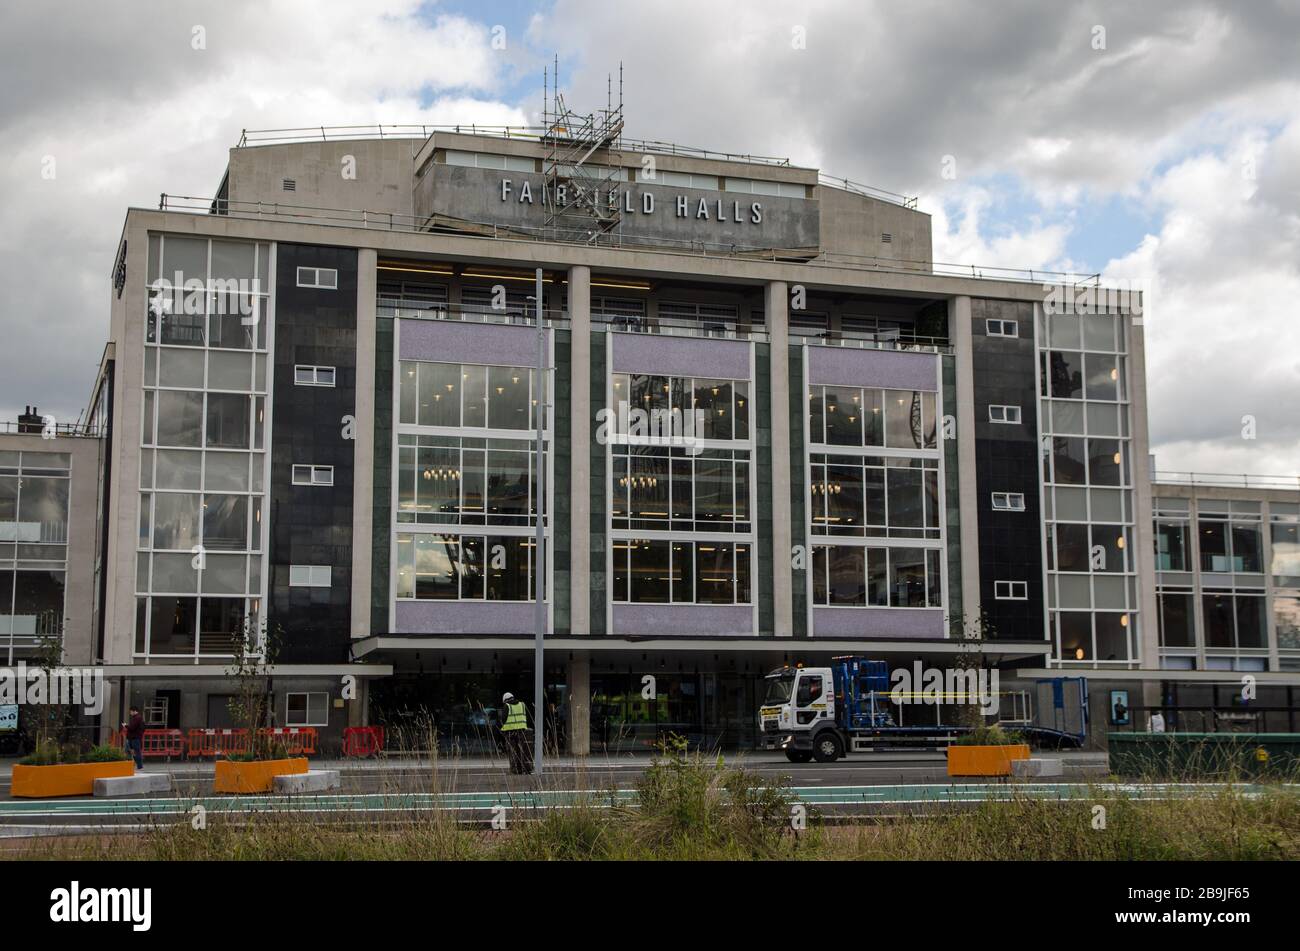 Croydon, UK - October 2, 2019: Renovation work underway at the famous Fairfield Halls concert and theatre venue in Croydon, South London. Stock Photo